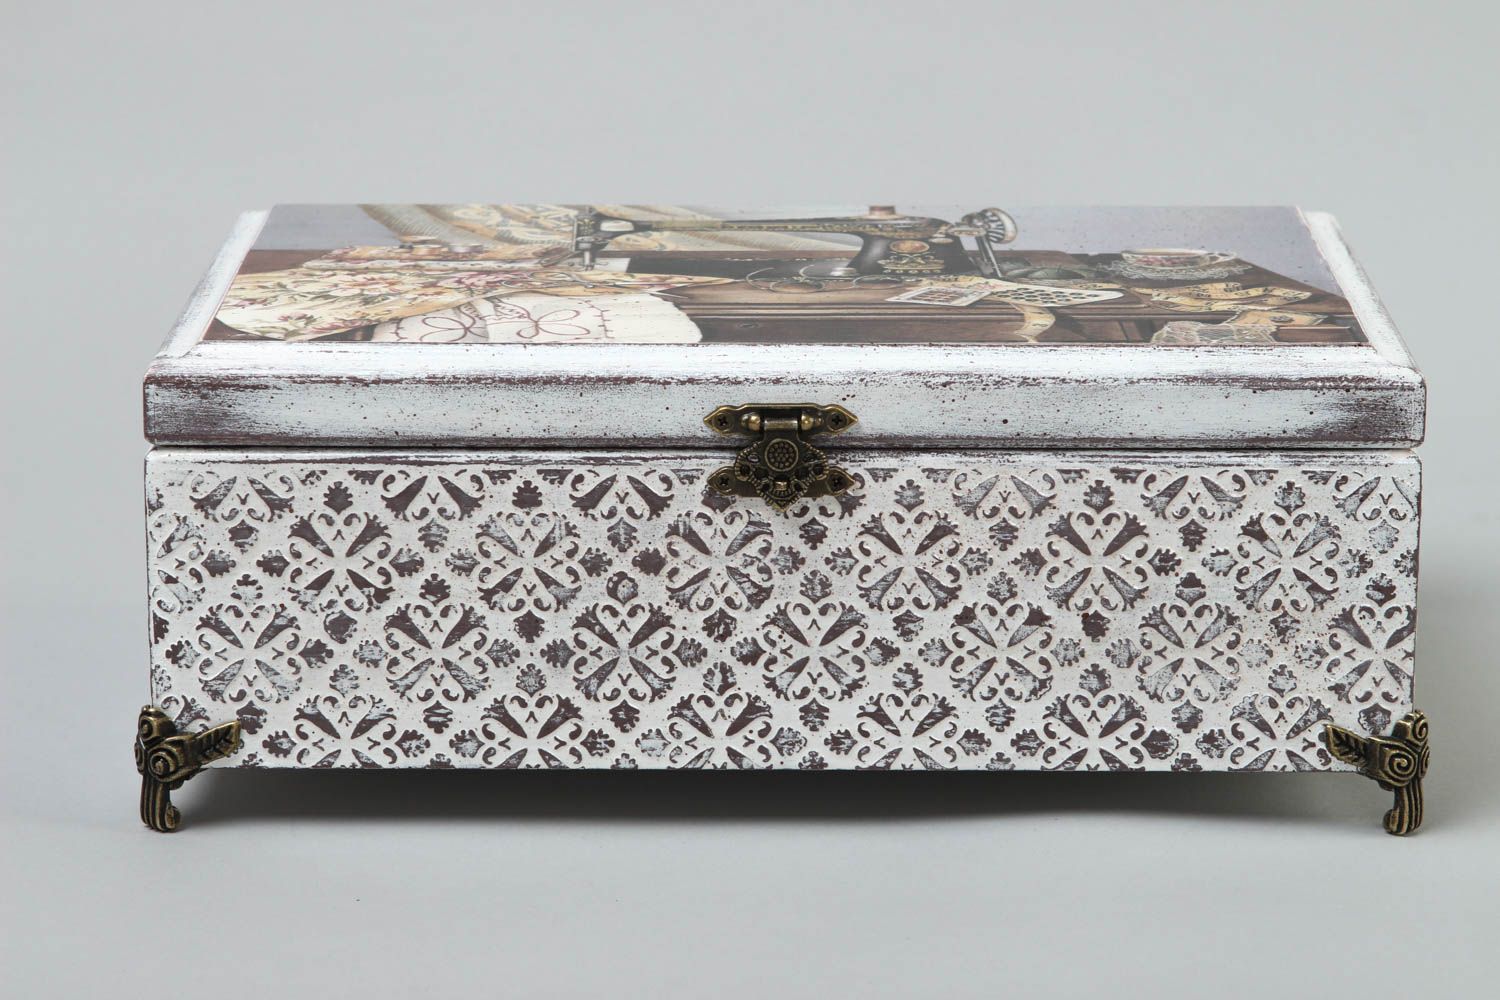 Handmade jewelry box with decoupage wood boxes home decor ideas wooden decor photo 2